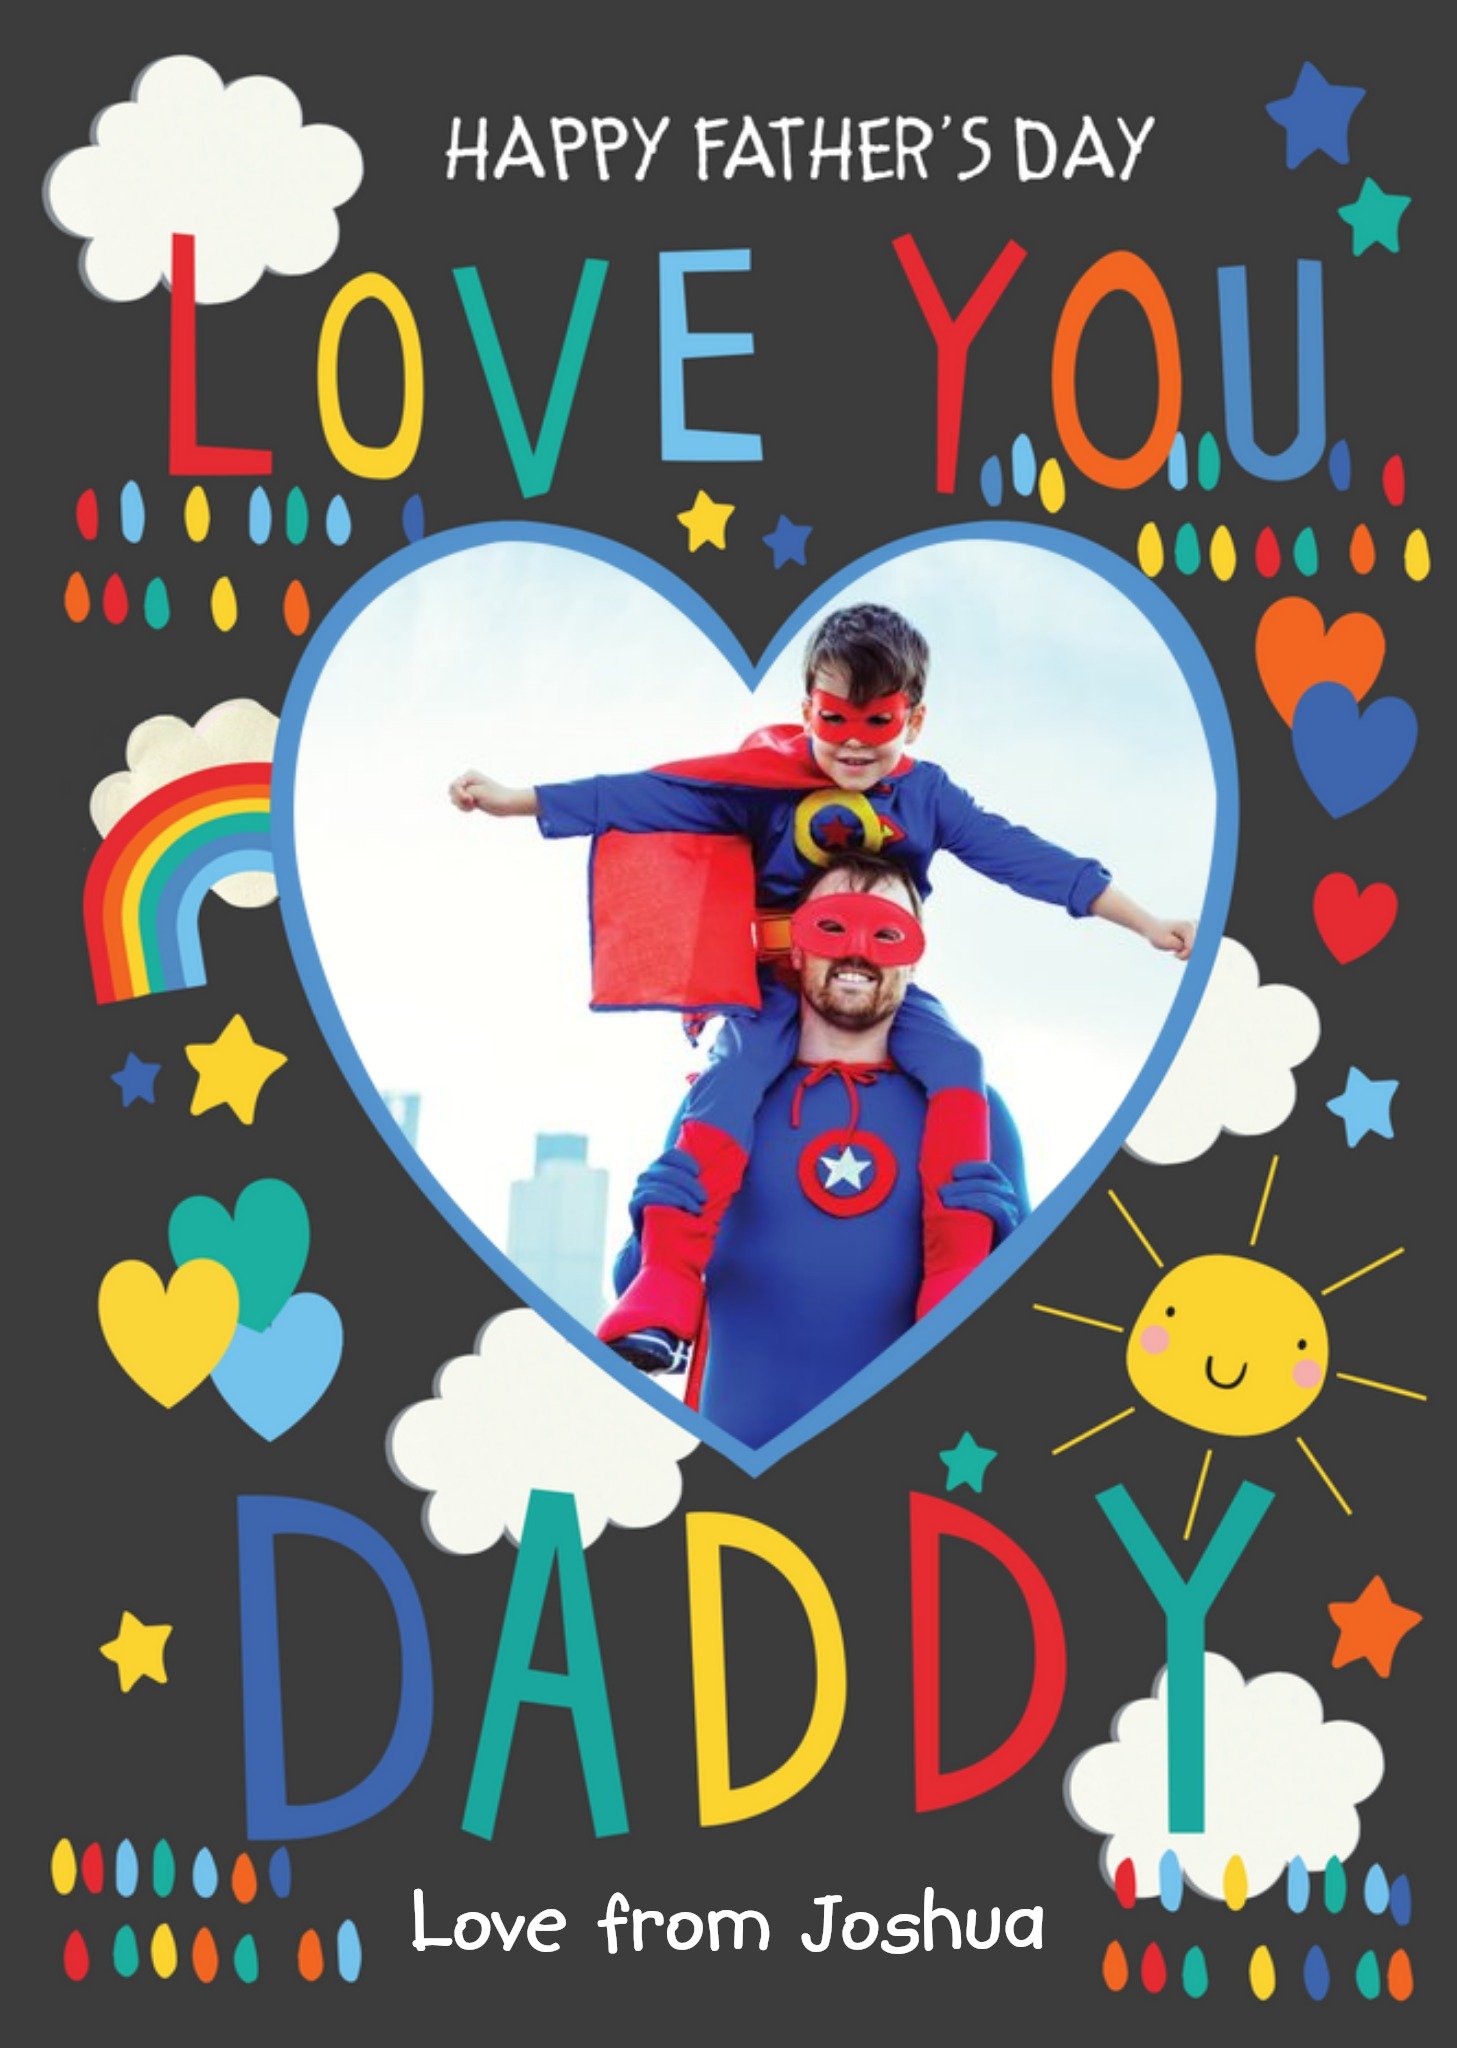 Moonpig Super Colourful Love You Daddy Happy Father's Day Photo Card Ecard